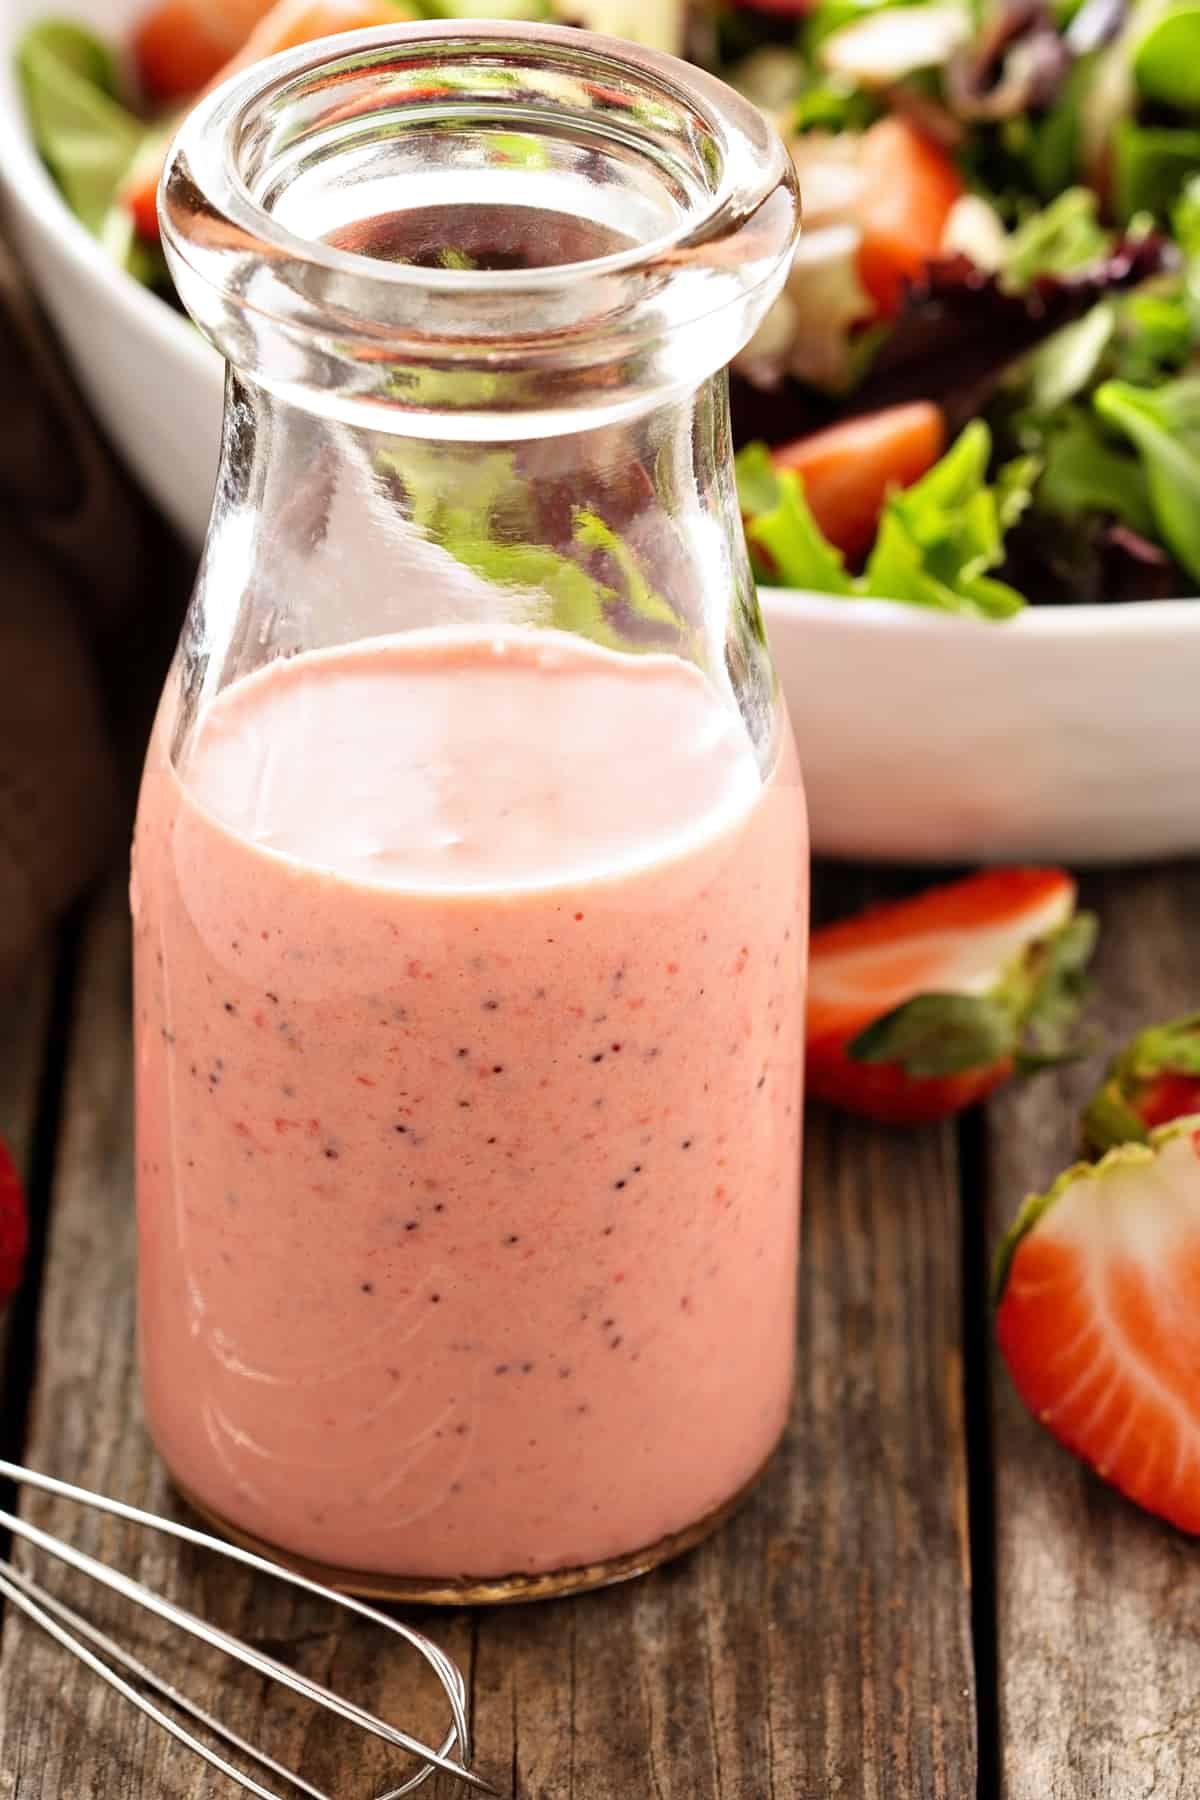 strawberry poppy seed dressing recipe salad homemade from scratch